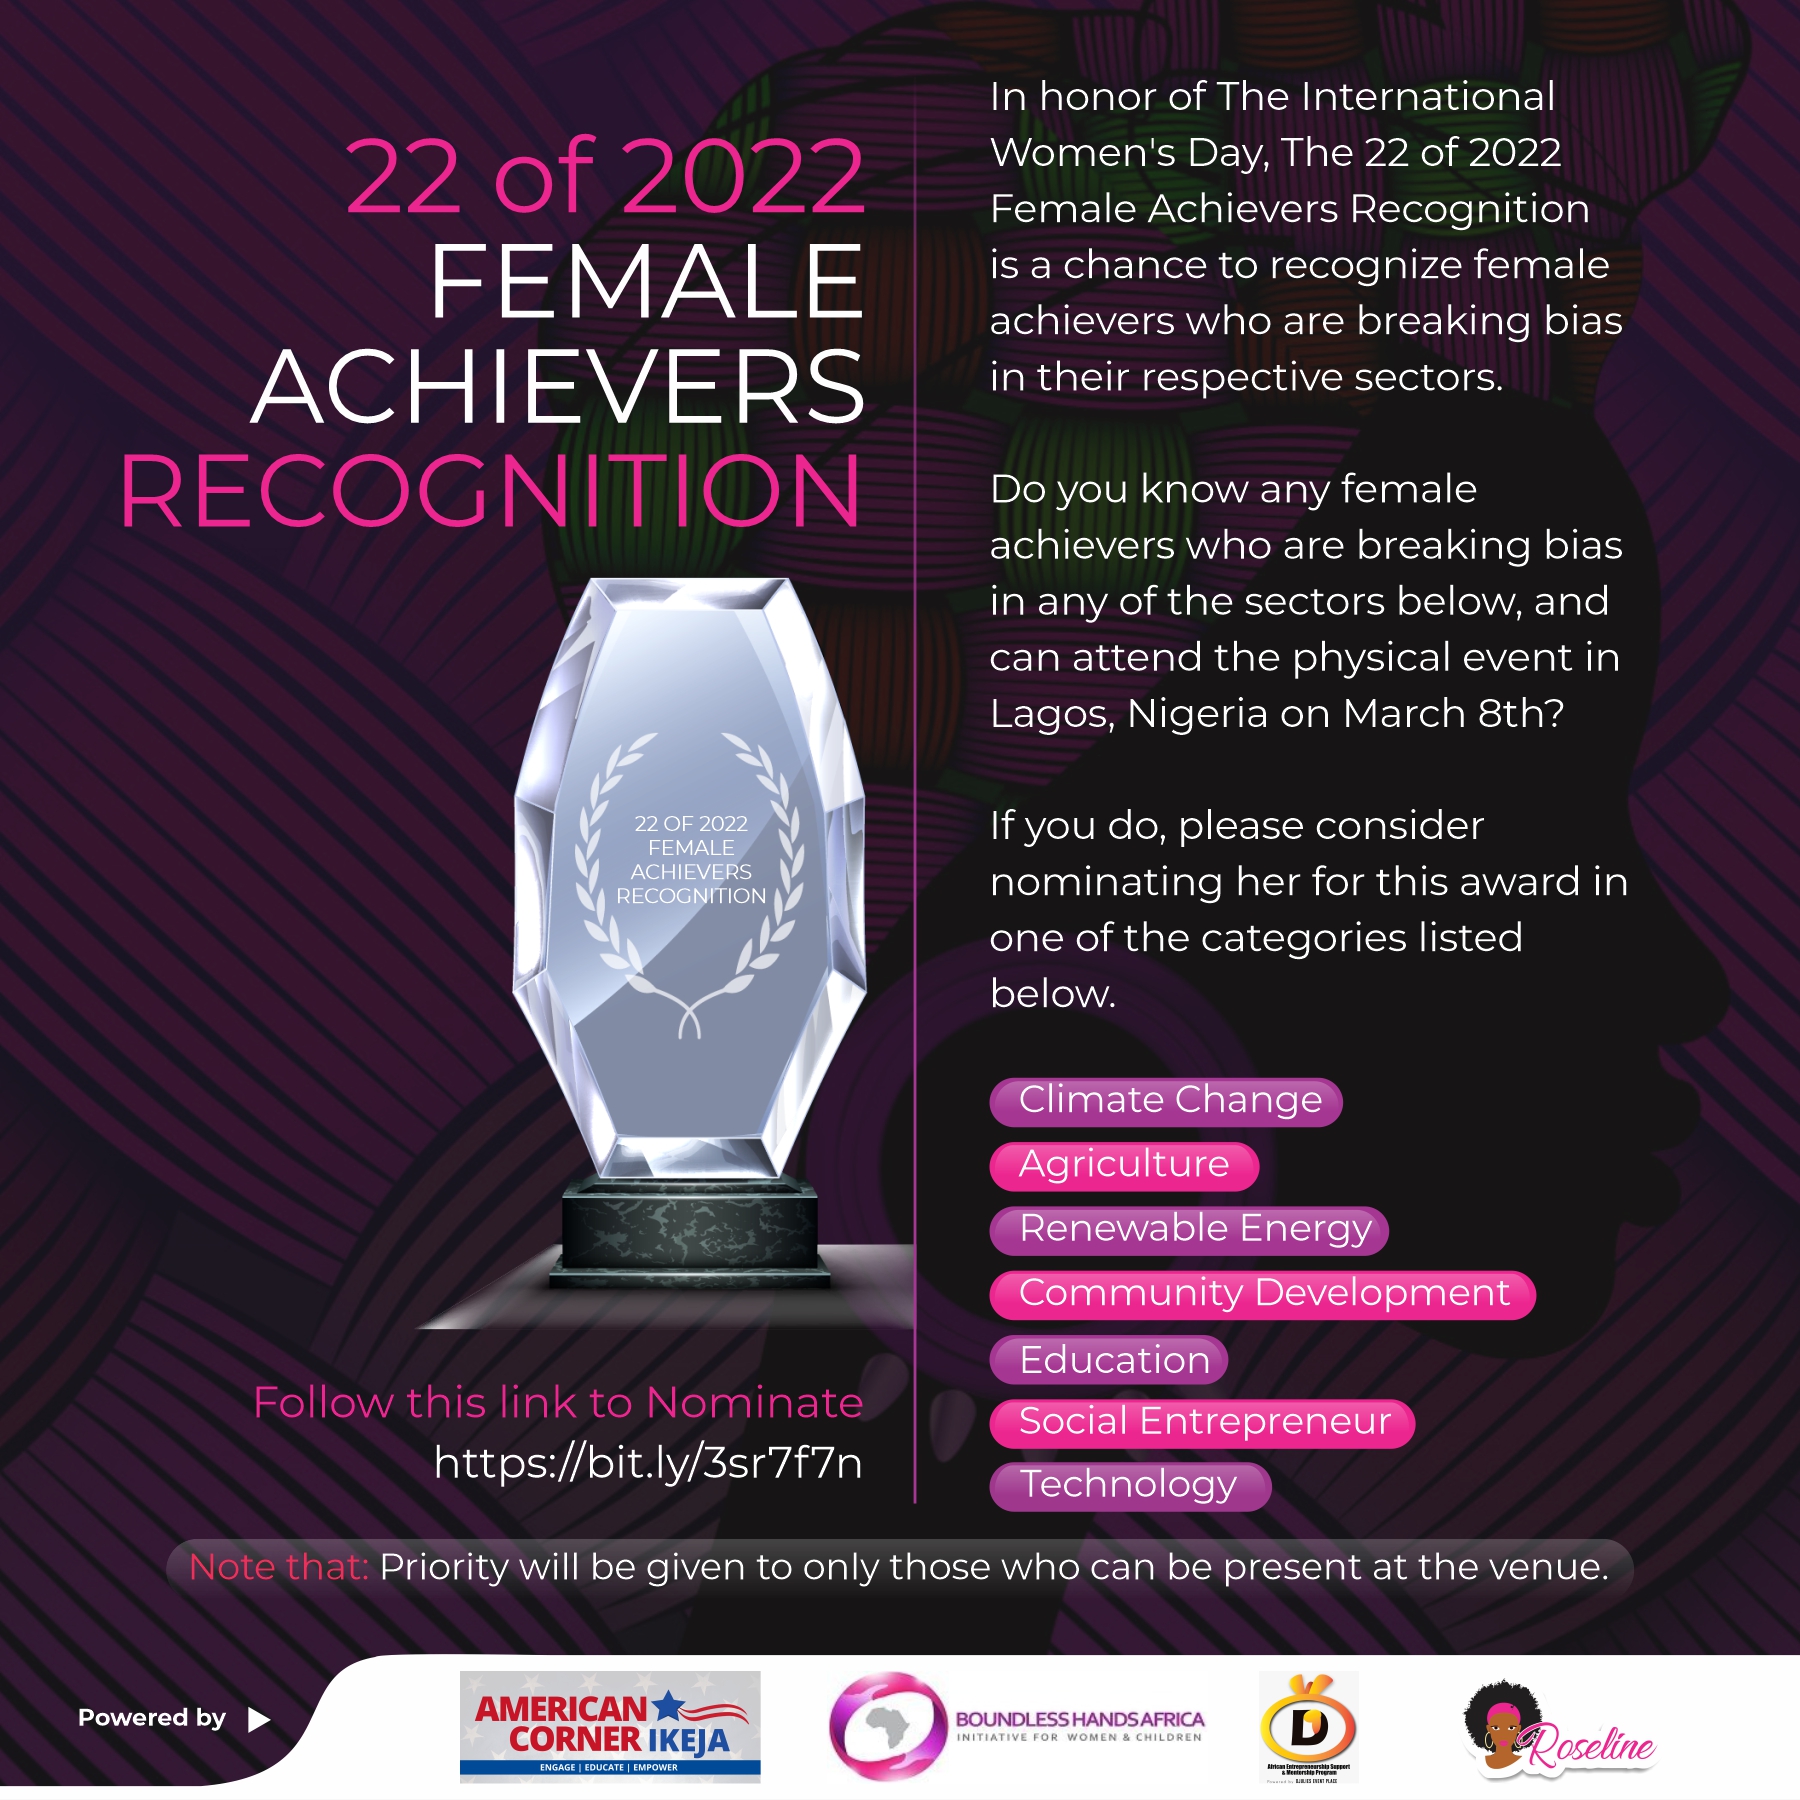 The 22 of 2022 Female Achievers Recognition – International Women’s Day 2022